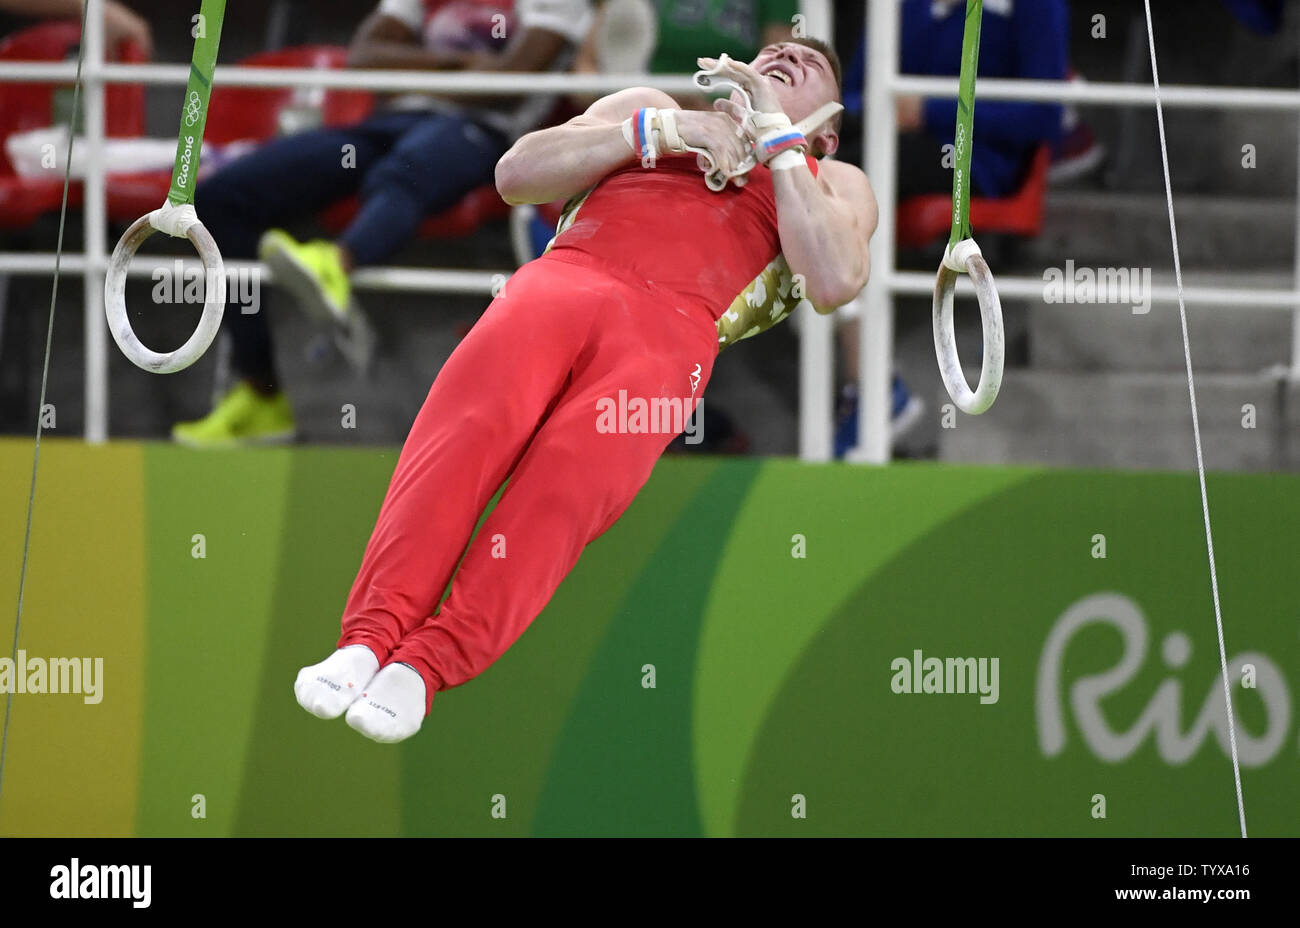 Russia's Denis Abliazin begins his dismount after his routine on the Rings during the Men's Rings Final at the 2016 Rio Summer Olympics in Rio de Janeiro, Brazil, August 15, 2016. Abliazin won the Bronze Medal as Greece's Eleftherios Petrounias won the Gold and Brazil's Arthur Zanetti won the Silver.      Photo by Mike Theiler/UPI Stock Photo